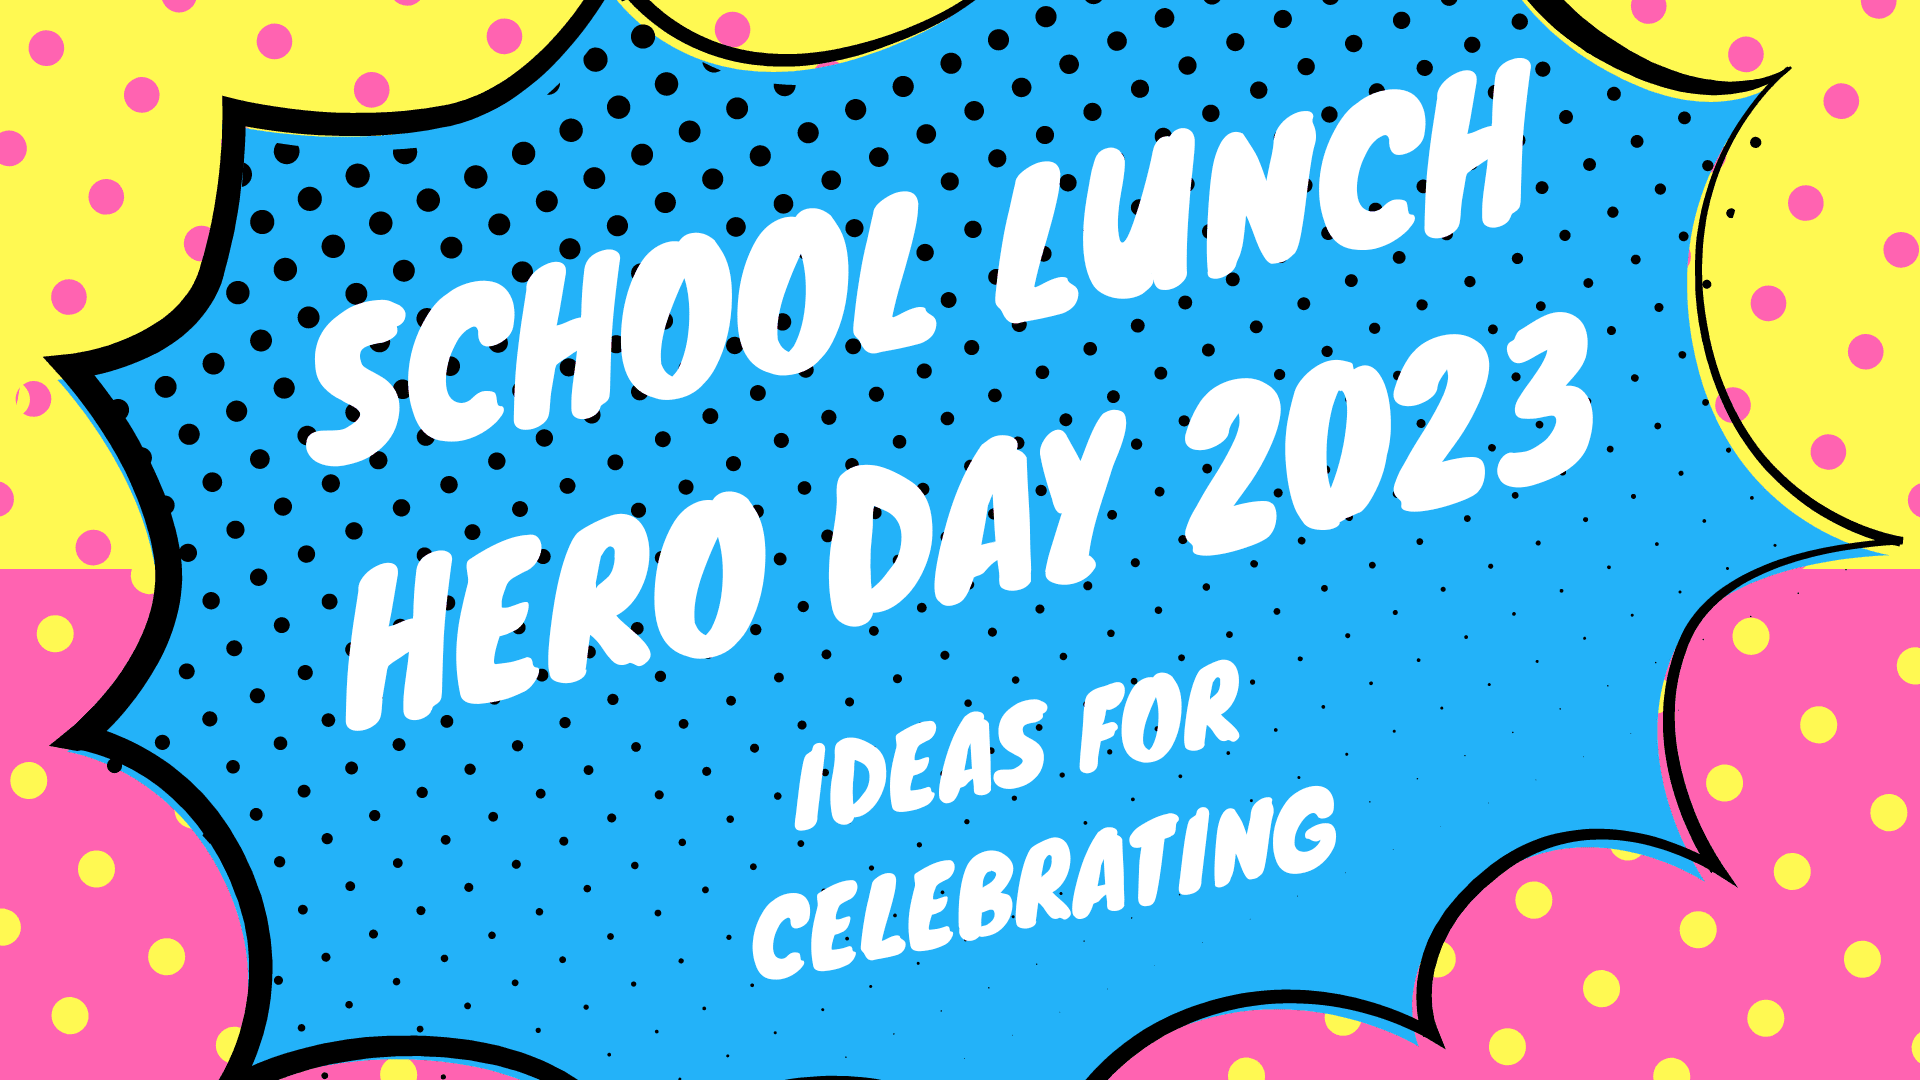 school-lunch-hero-day-2023-ideas-for-celebrating